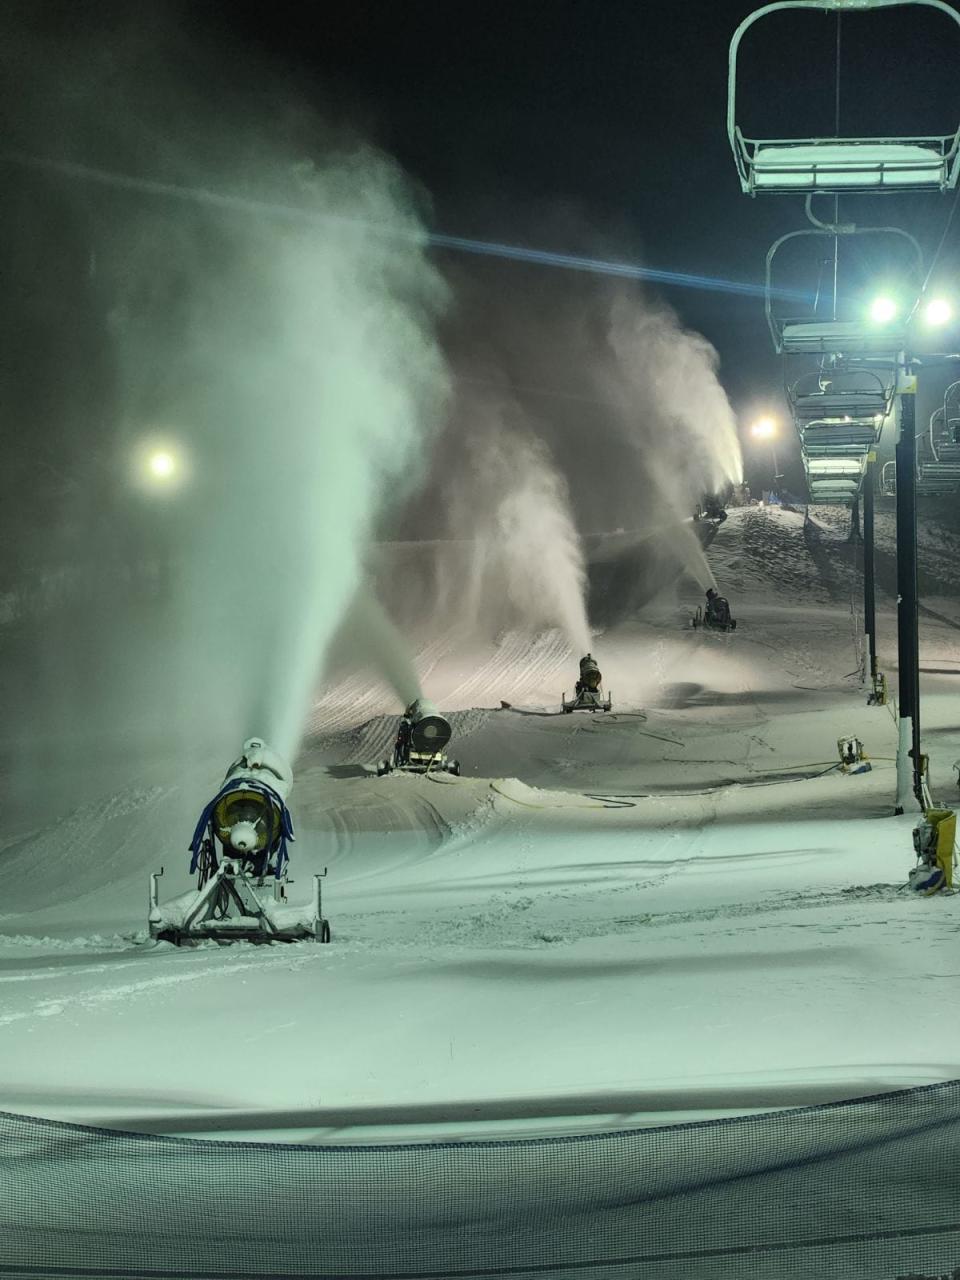 Seven Oaks recreation area in Boone, Iowa, has 21 snowmaking machines that can convert 1,600 gallons of water to snow each minute.